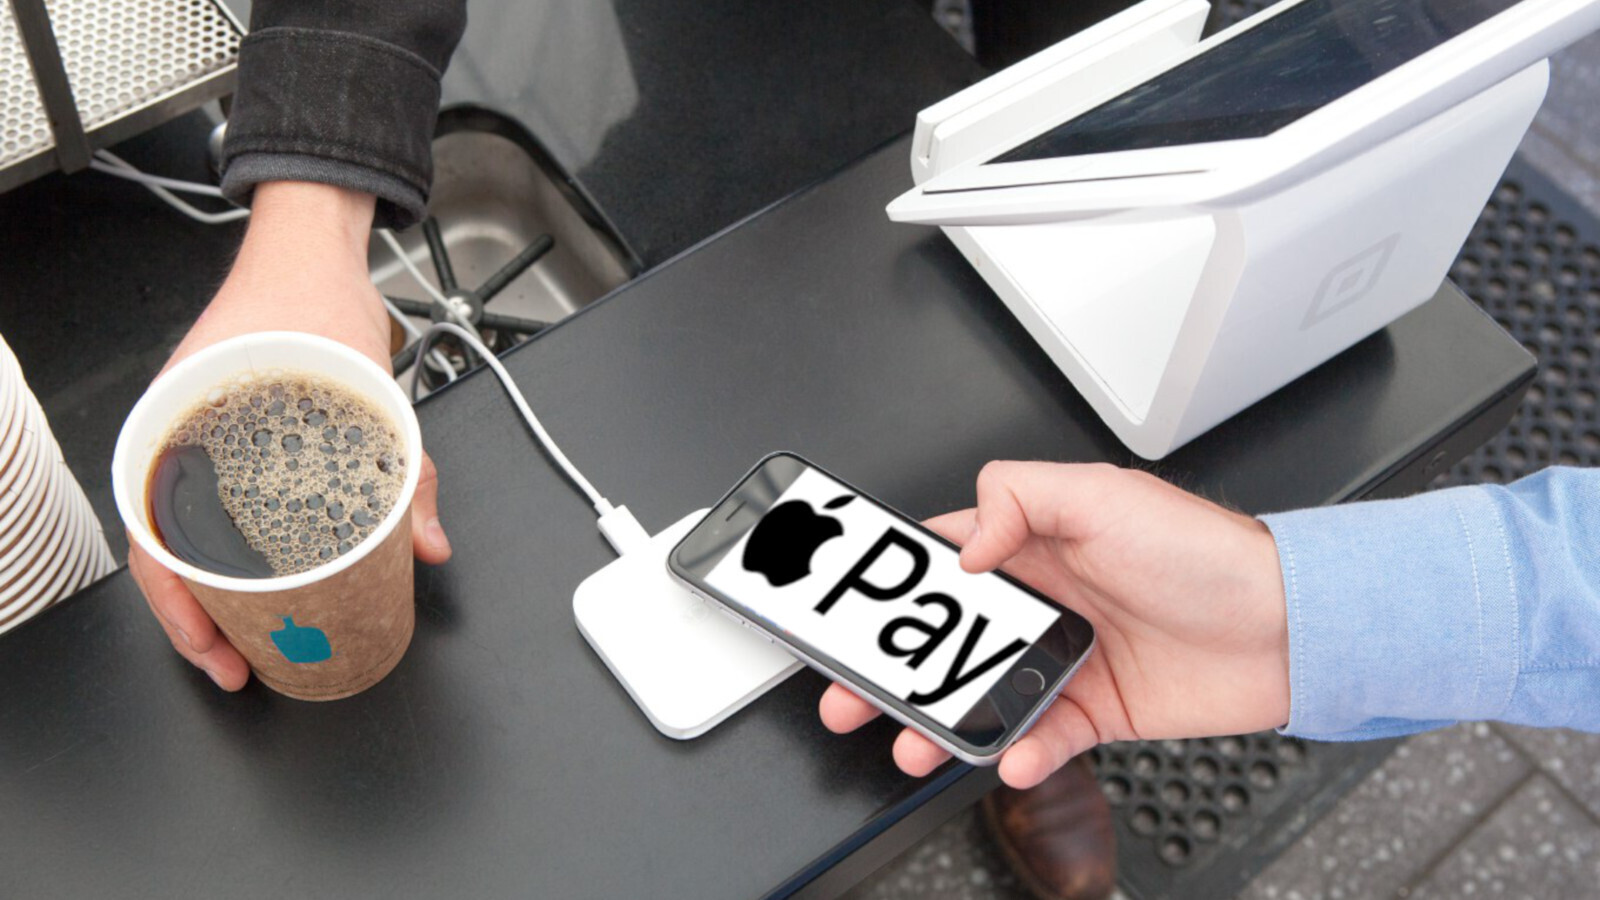 Apple Pay accounts for 5% of global card transactions, growing to rival PayPal